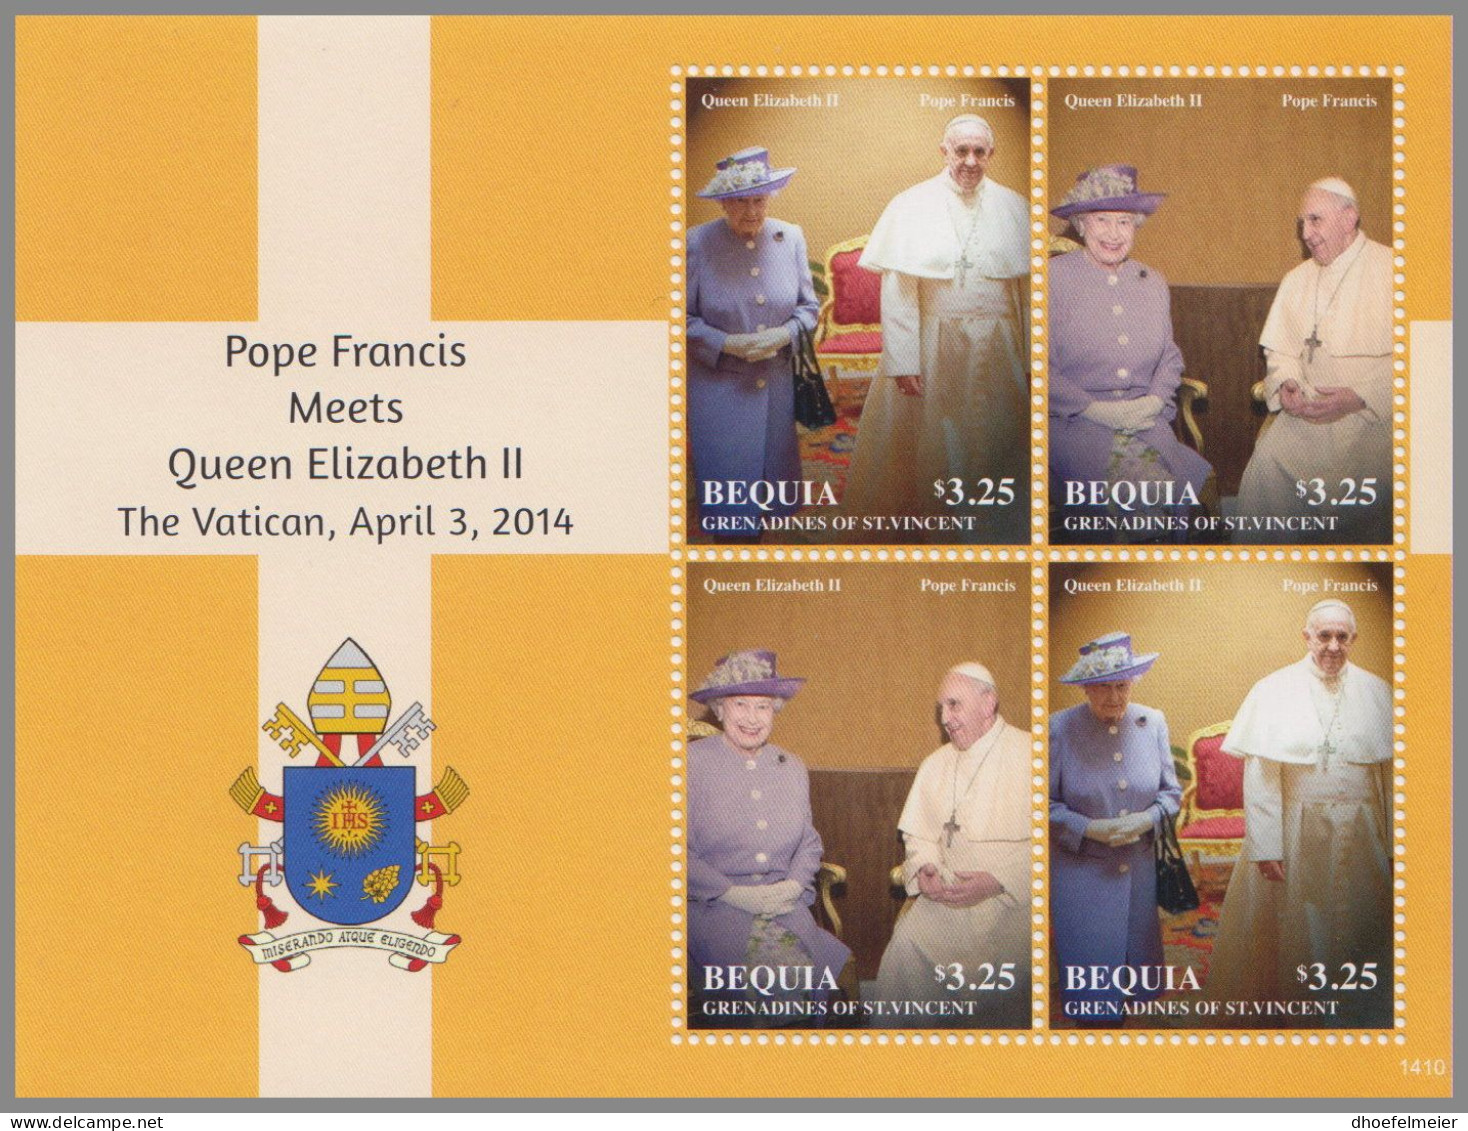 BEQUIA GRENADINES 2014 MNH Pope Francis Meets Queen Elizabeth II. 1410 M/S – OFFICIAL ISSUE – DHQ49610 - Pausen